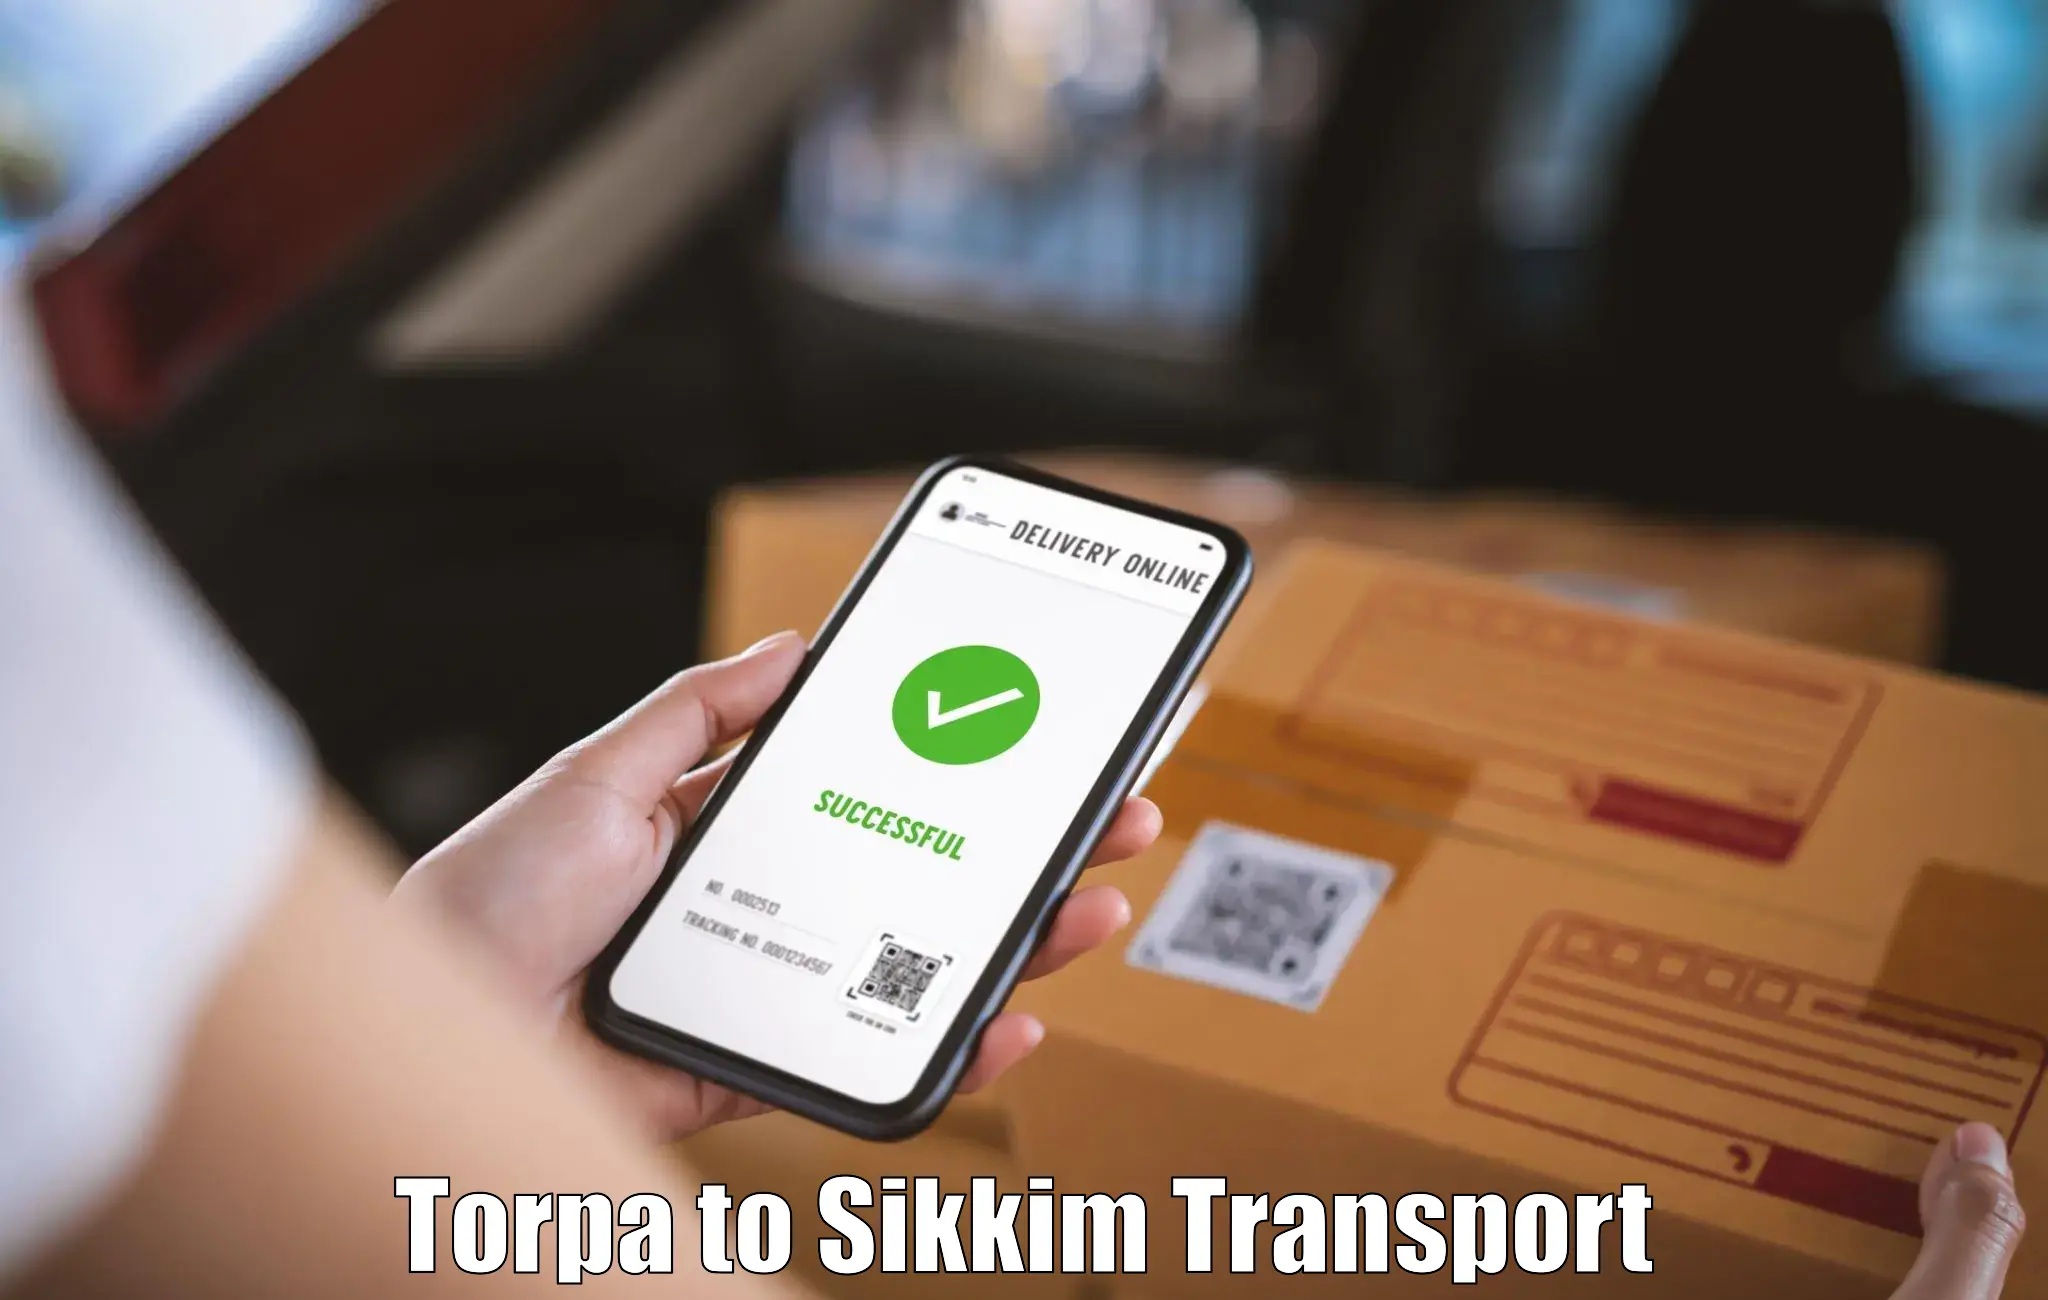 Transport shared services Torpa to South Sikkim